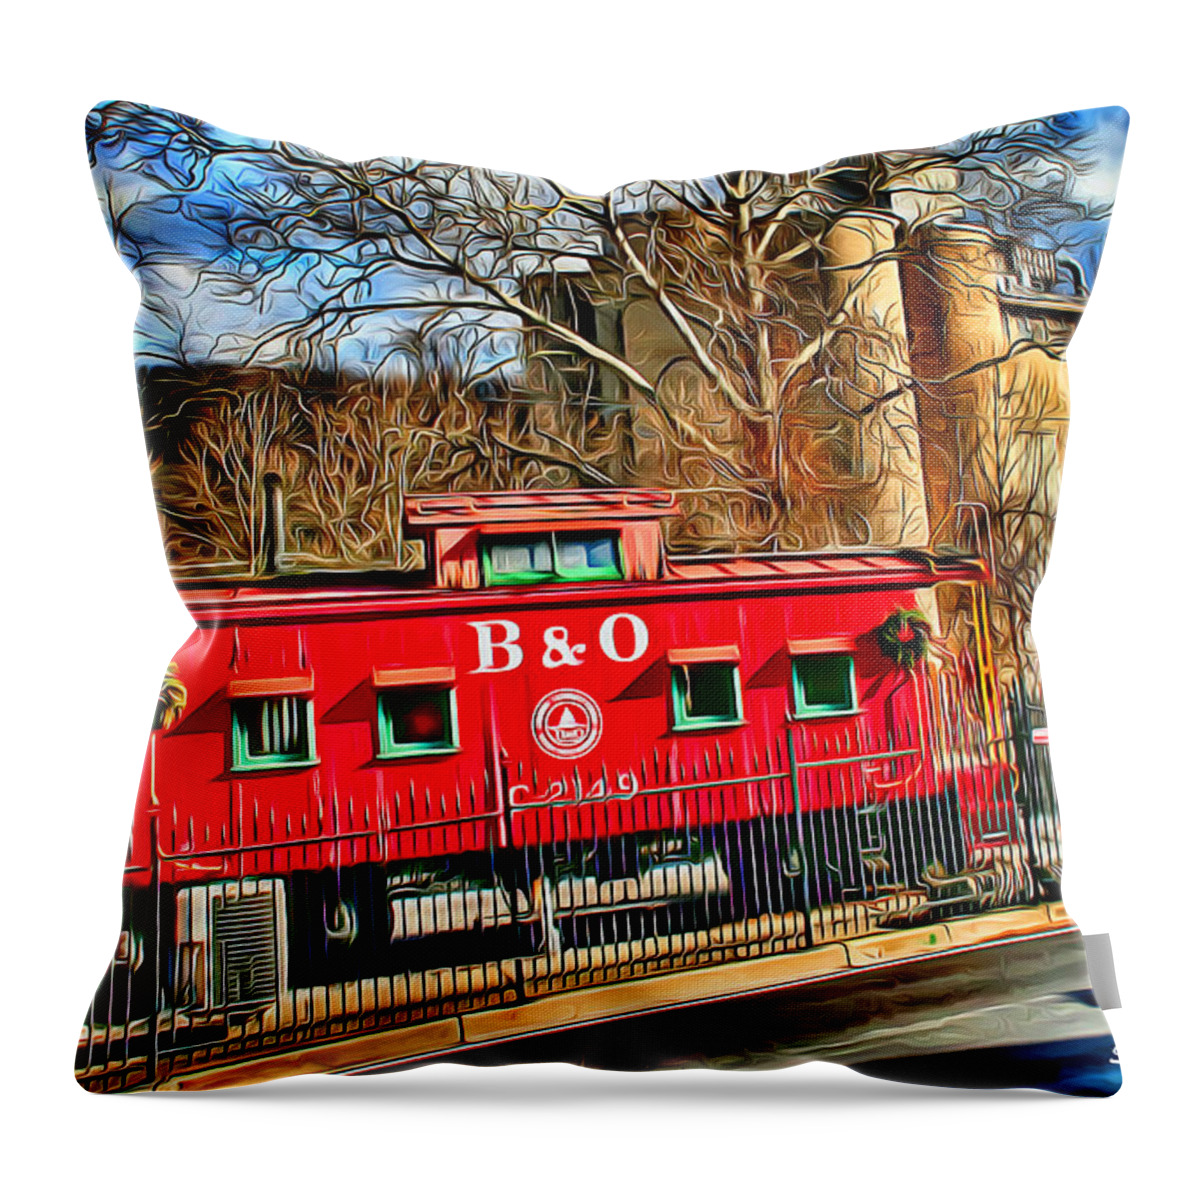 Ellicott Throw Pillow featuring the digital art Ellicott City Train and Factory by Stephen Younts